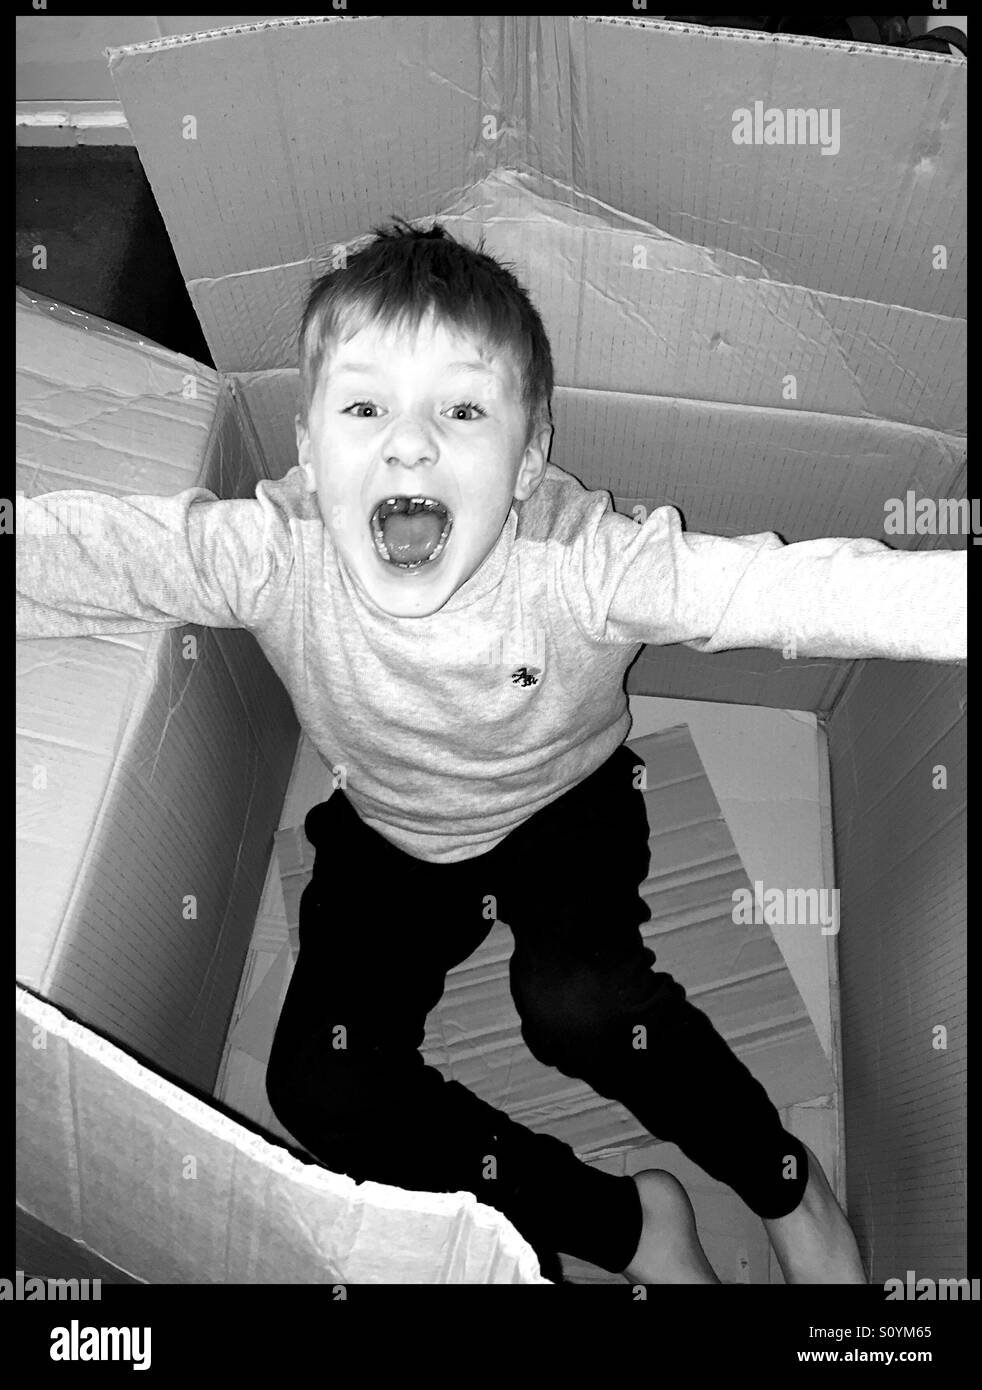 Boy bursting out of a cardboard box Stock Photo